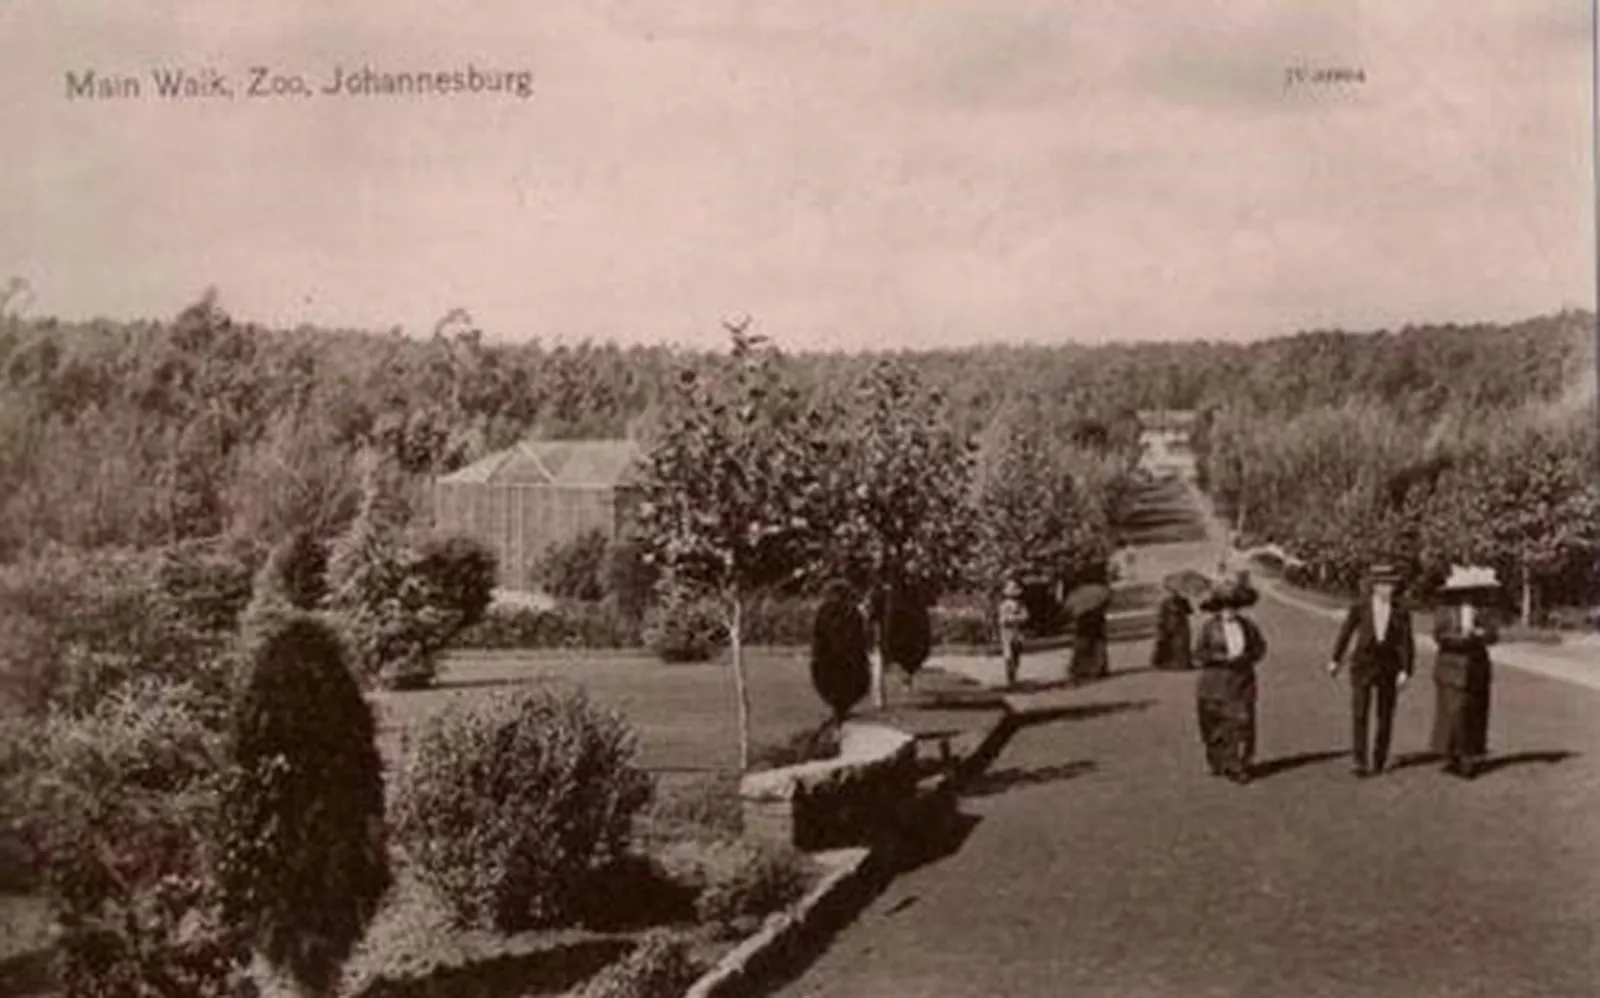 The johannesburg zoo where school children celebrate the end of the war